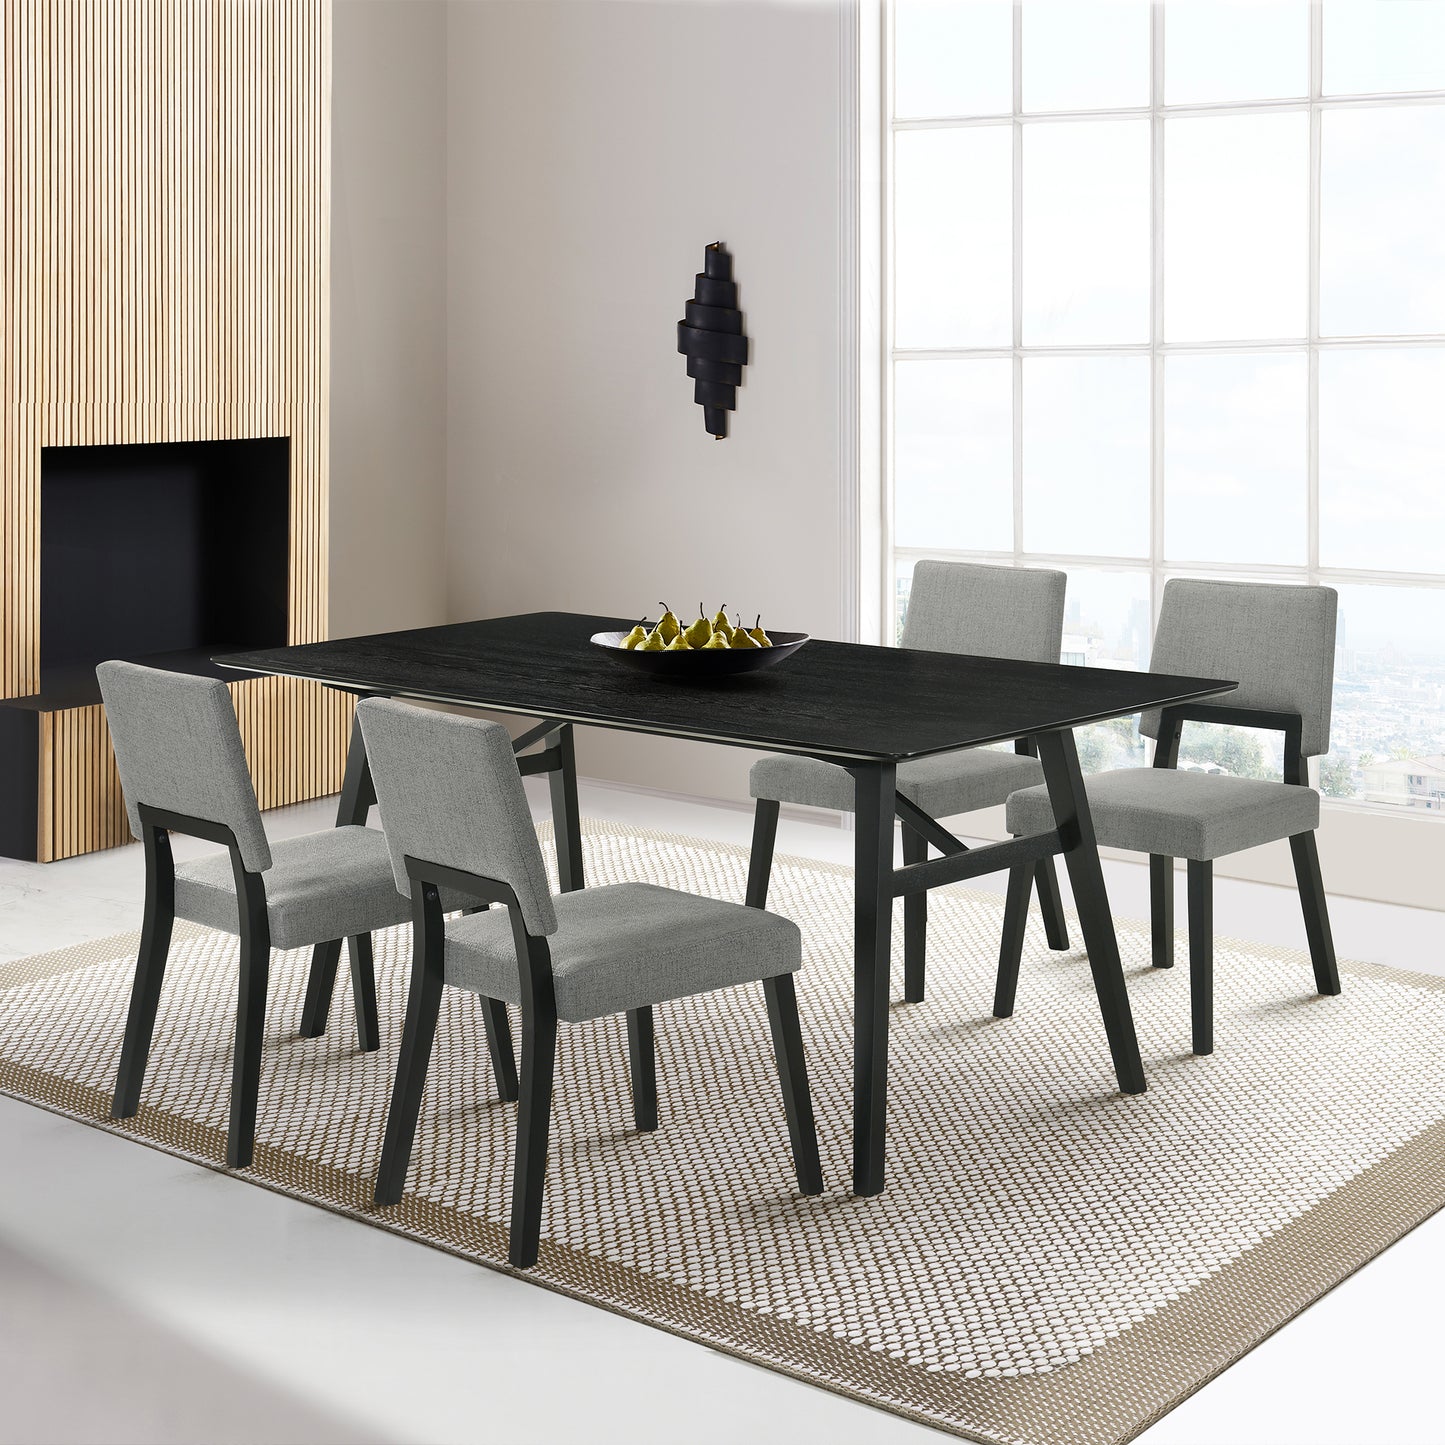 Channell 5 Piece Black Wood Dining Table Set with Charcoal Fabric